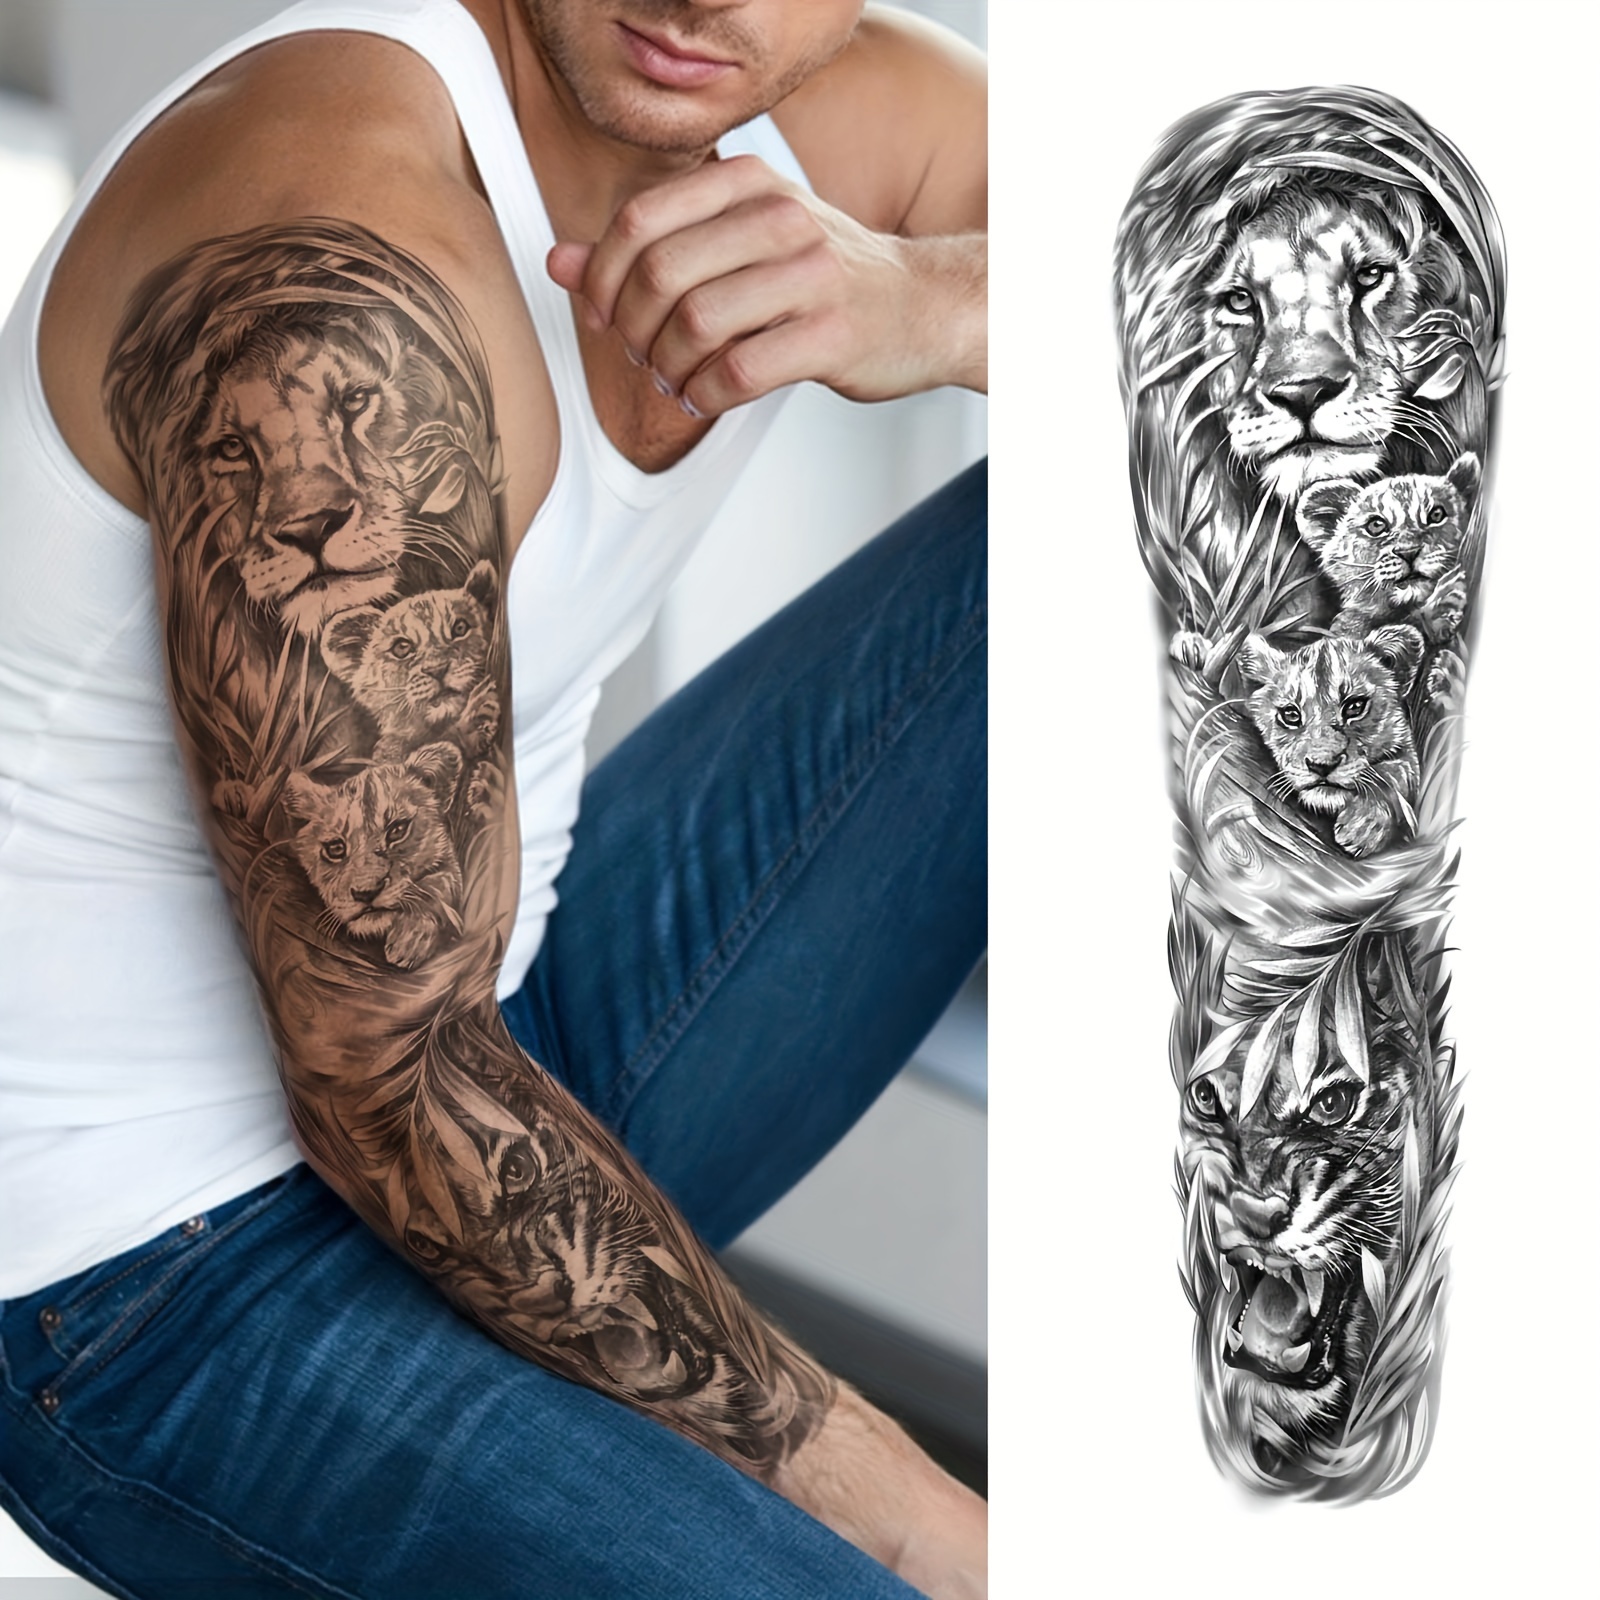 

Black Full Arm Temporary Tattoo, With Bird Lion Deer Forest Wolf Sailboat River Blonde Beauty, Large Size Long Lasting Waterproof Body Art Fake Tattoo Stickers, Non-allergic For Men And Women